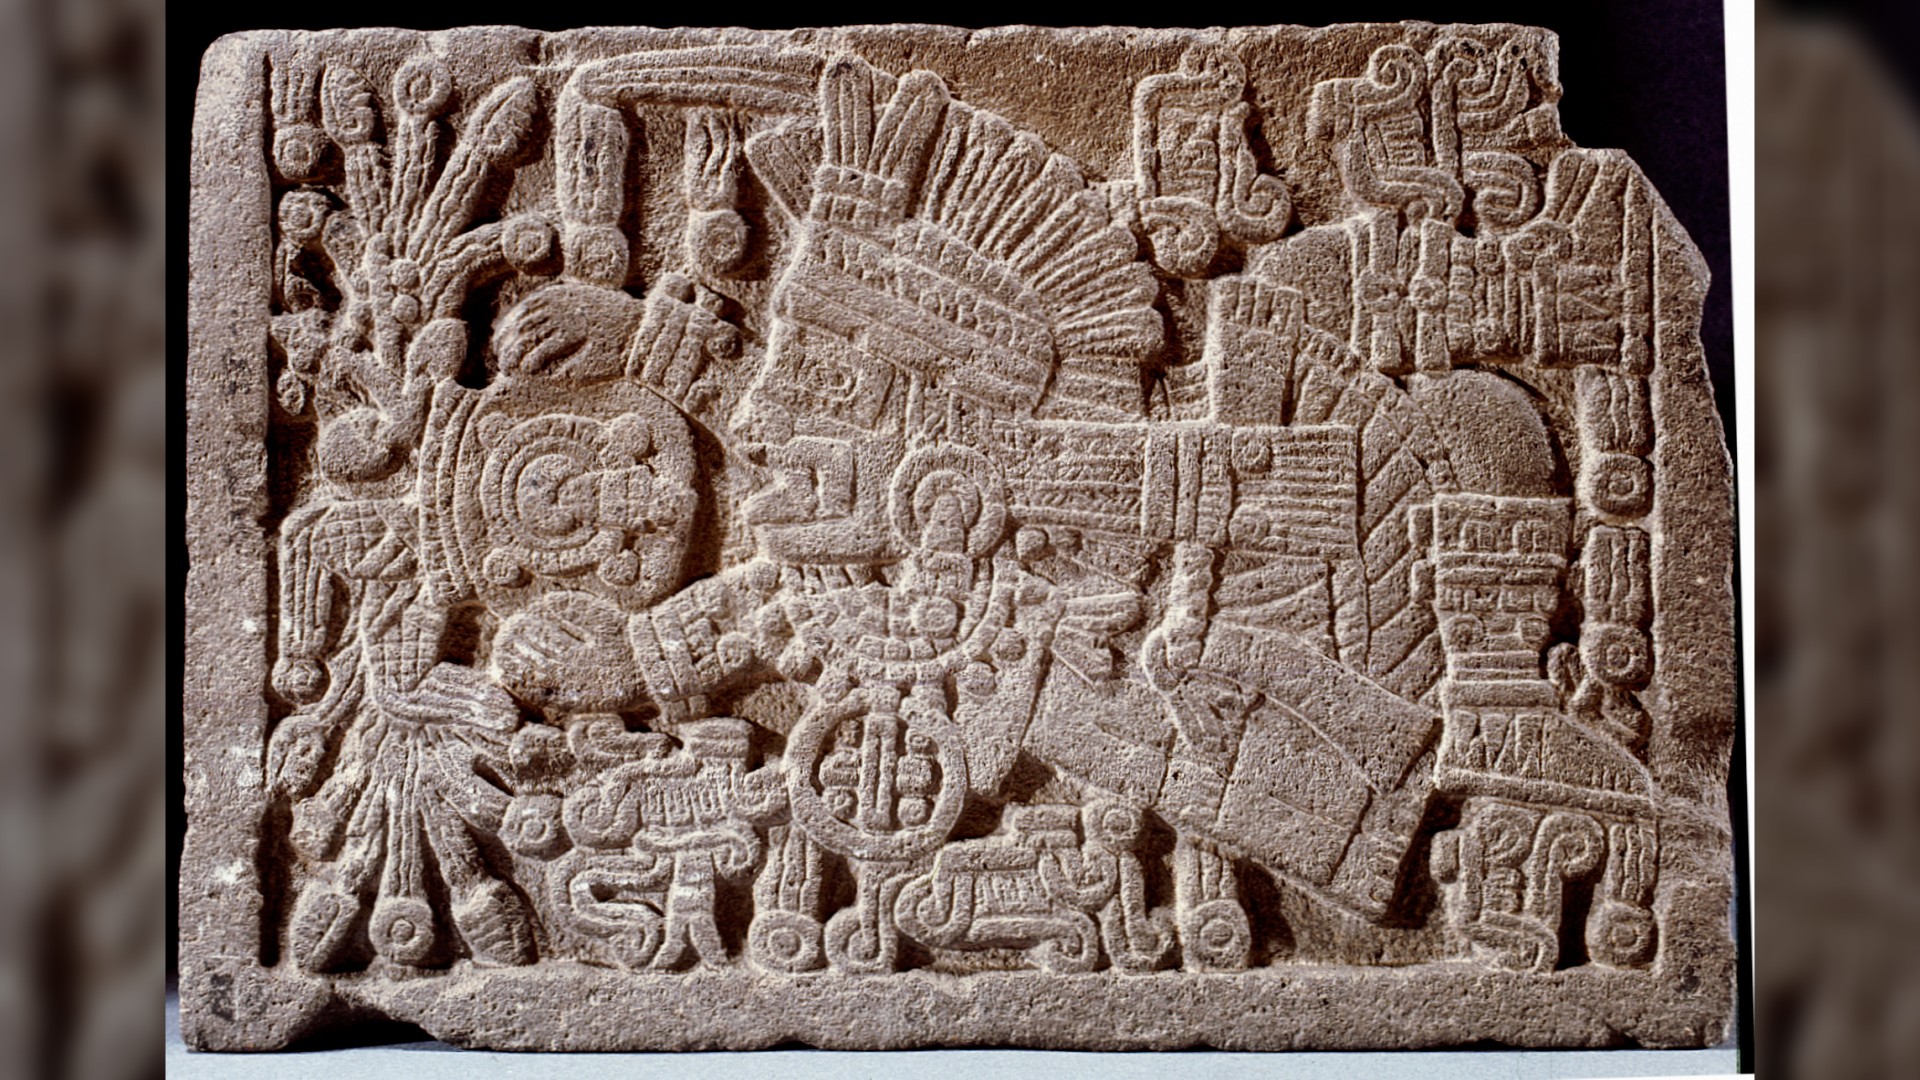 Base of a stone box which once contained the ashes of the Great Speaker, Ahuitzotl. The relief shows Tlaloc, the rain god, overturning a bowl of rain.